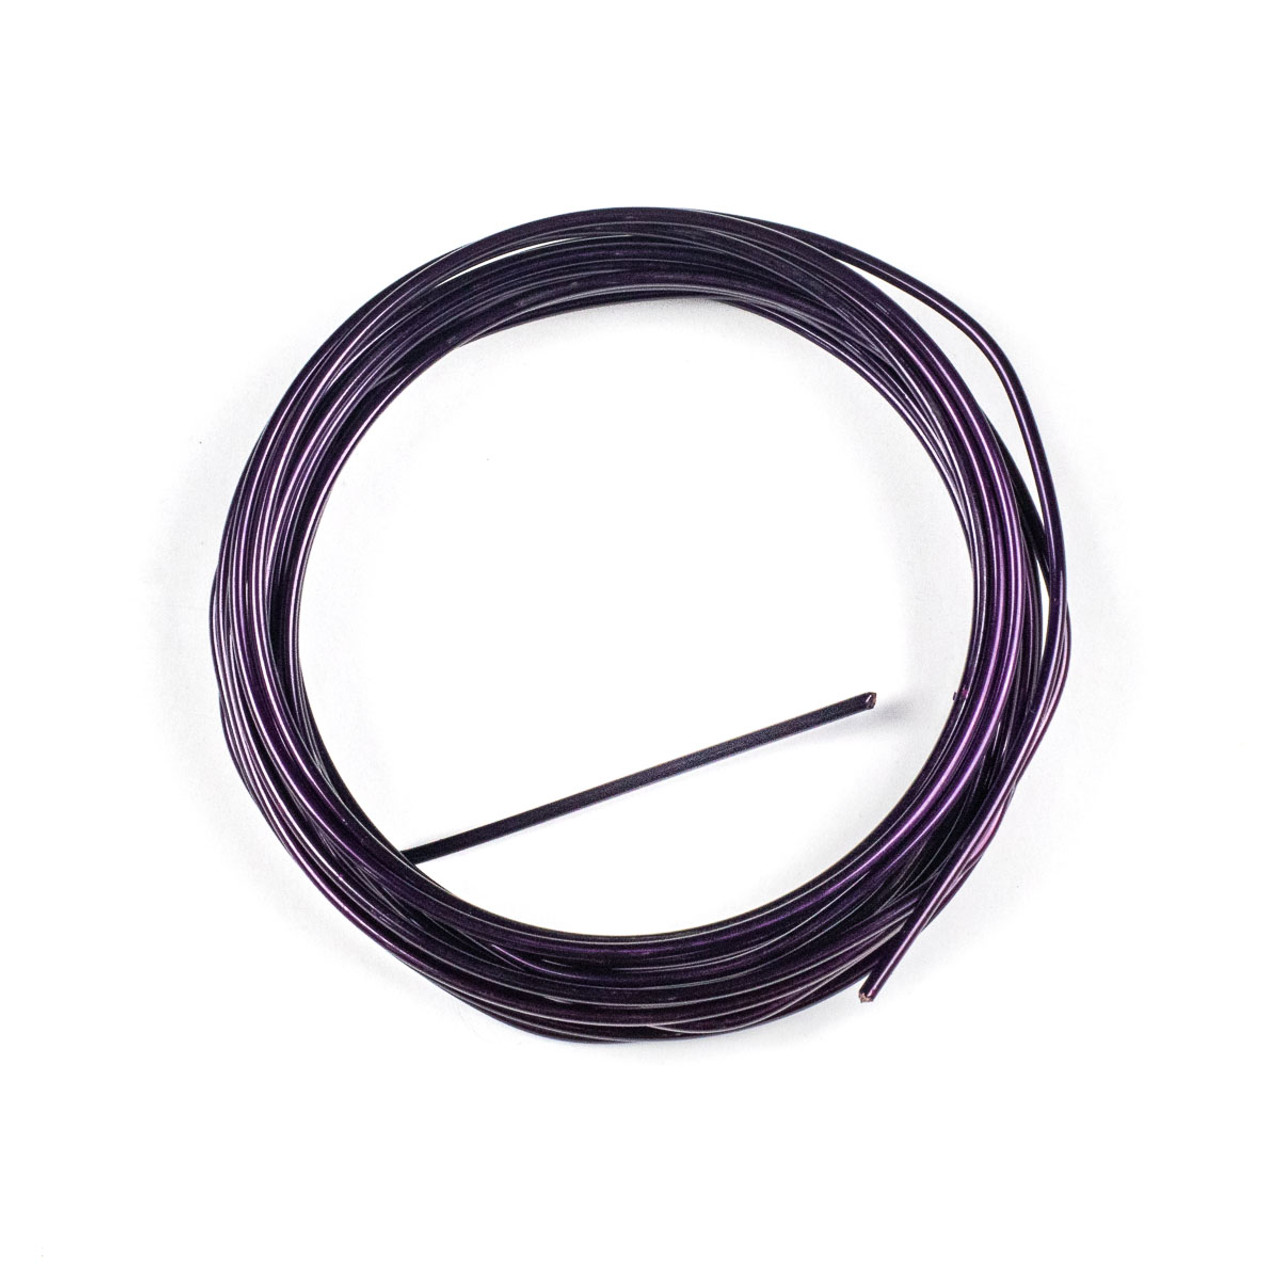 14 Gauge Coated Non-Tarnish Black Coated Copper Wire in a 10 Foot Coil